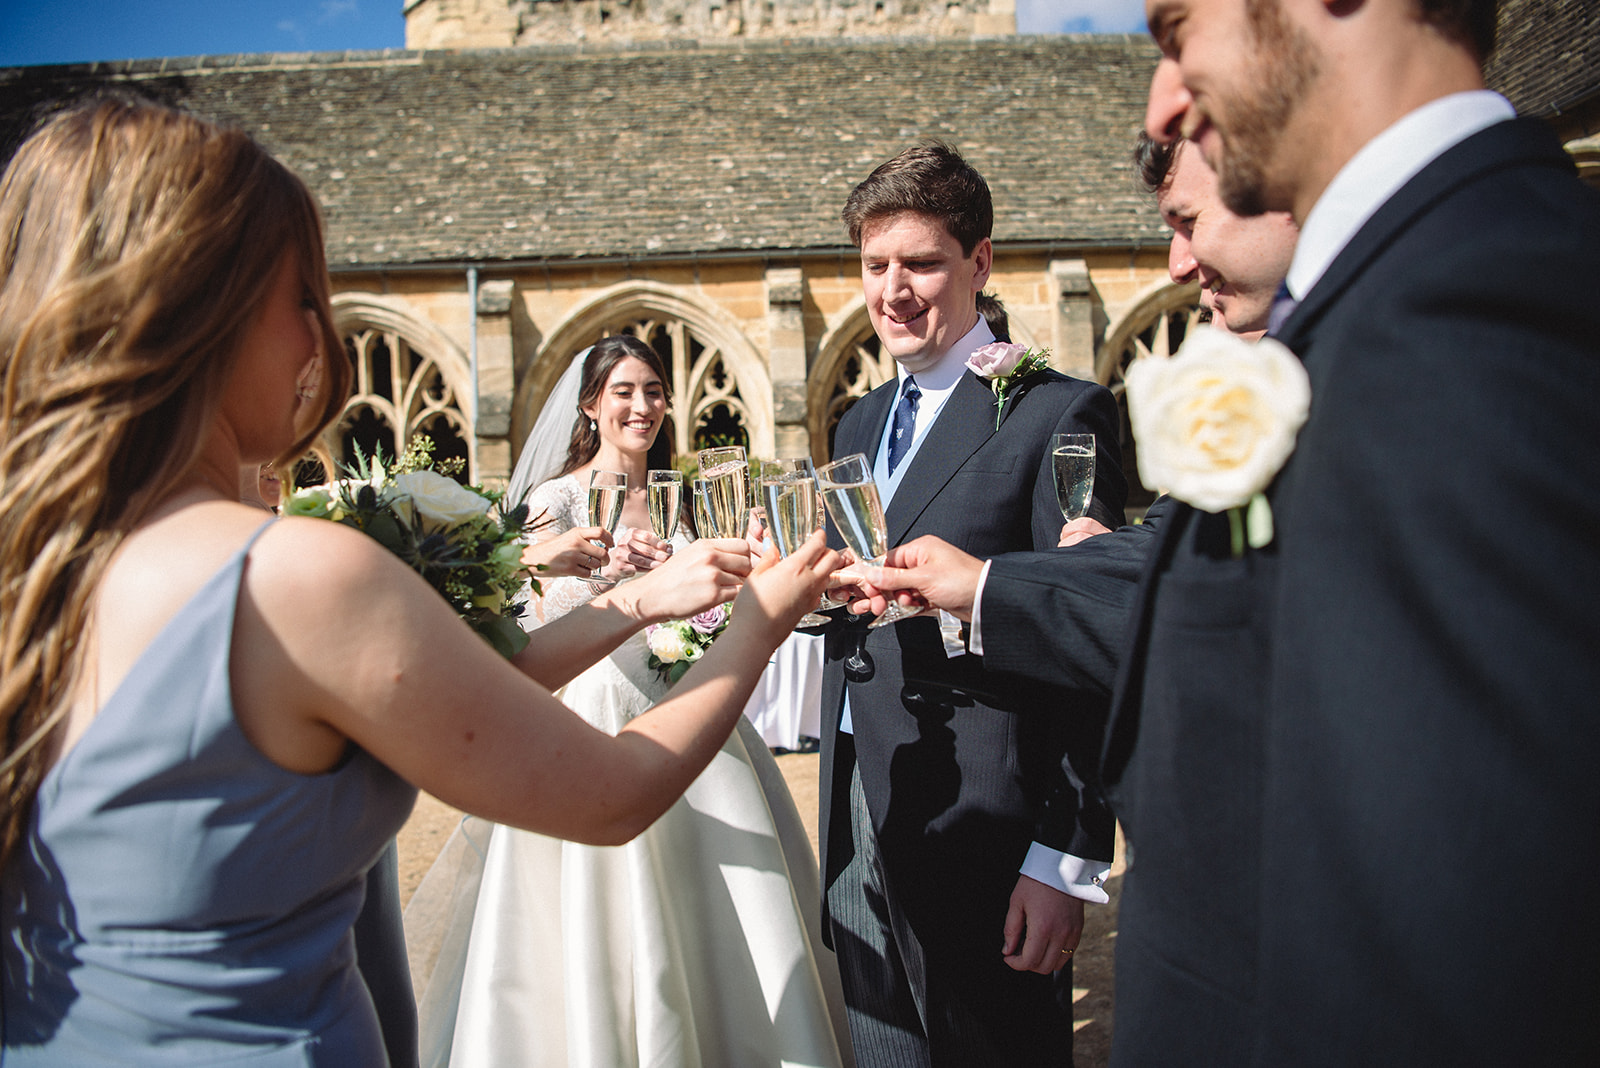 Katherine and Damien giving a toast with guests outside the New College Chapel